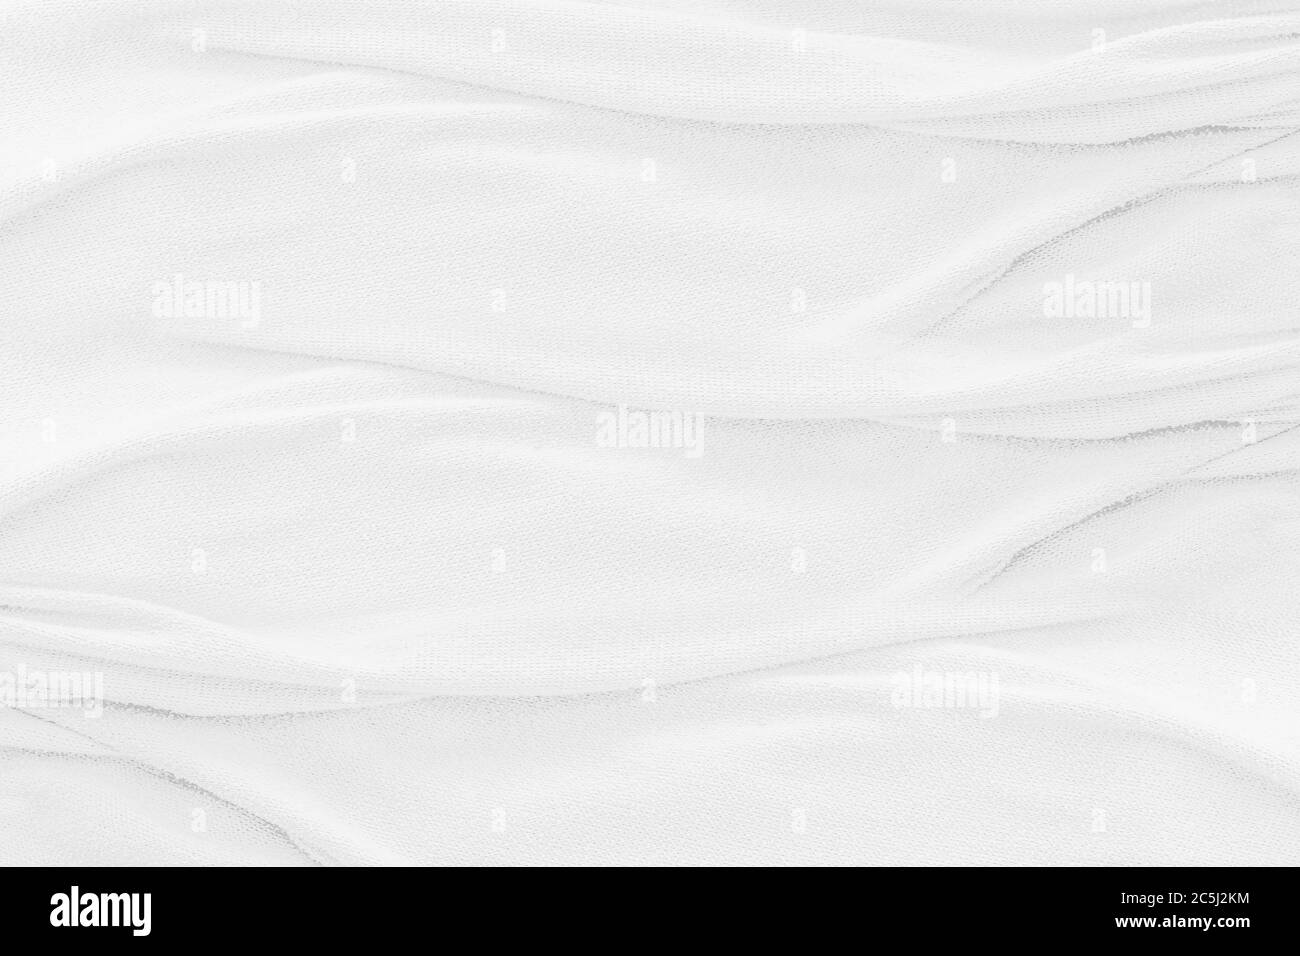 Abstract soft white cloth texture background Stock Photo